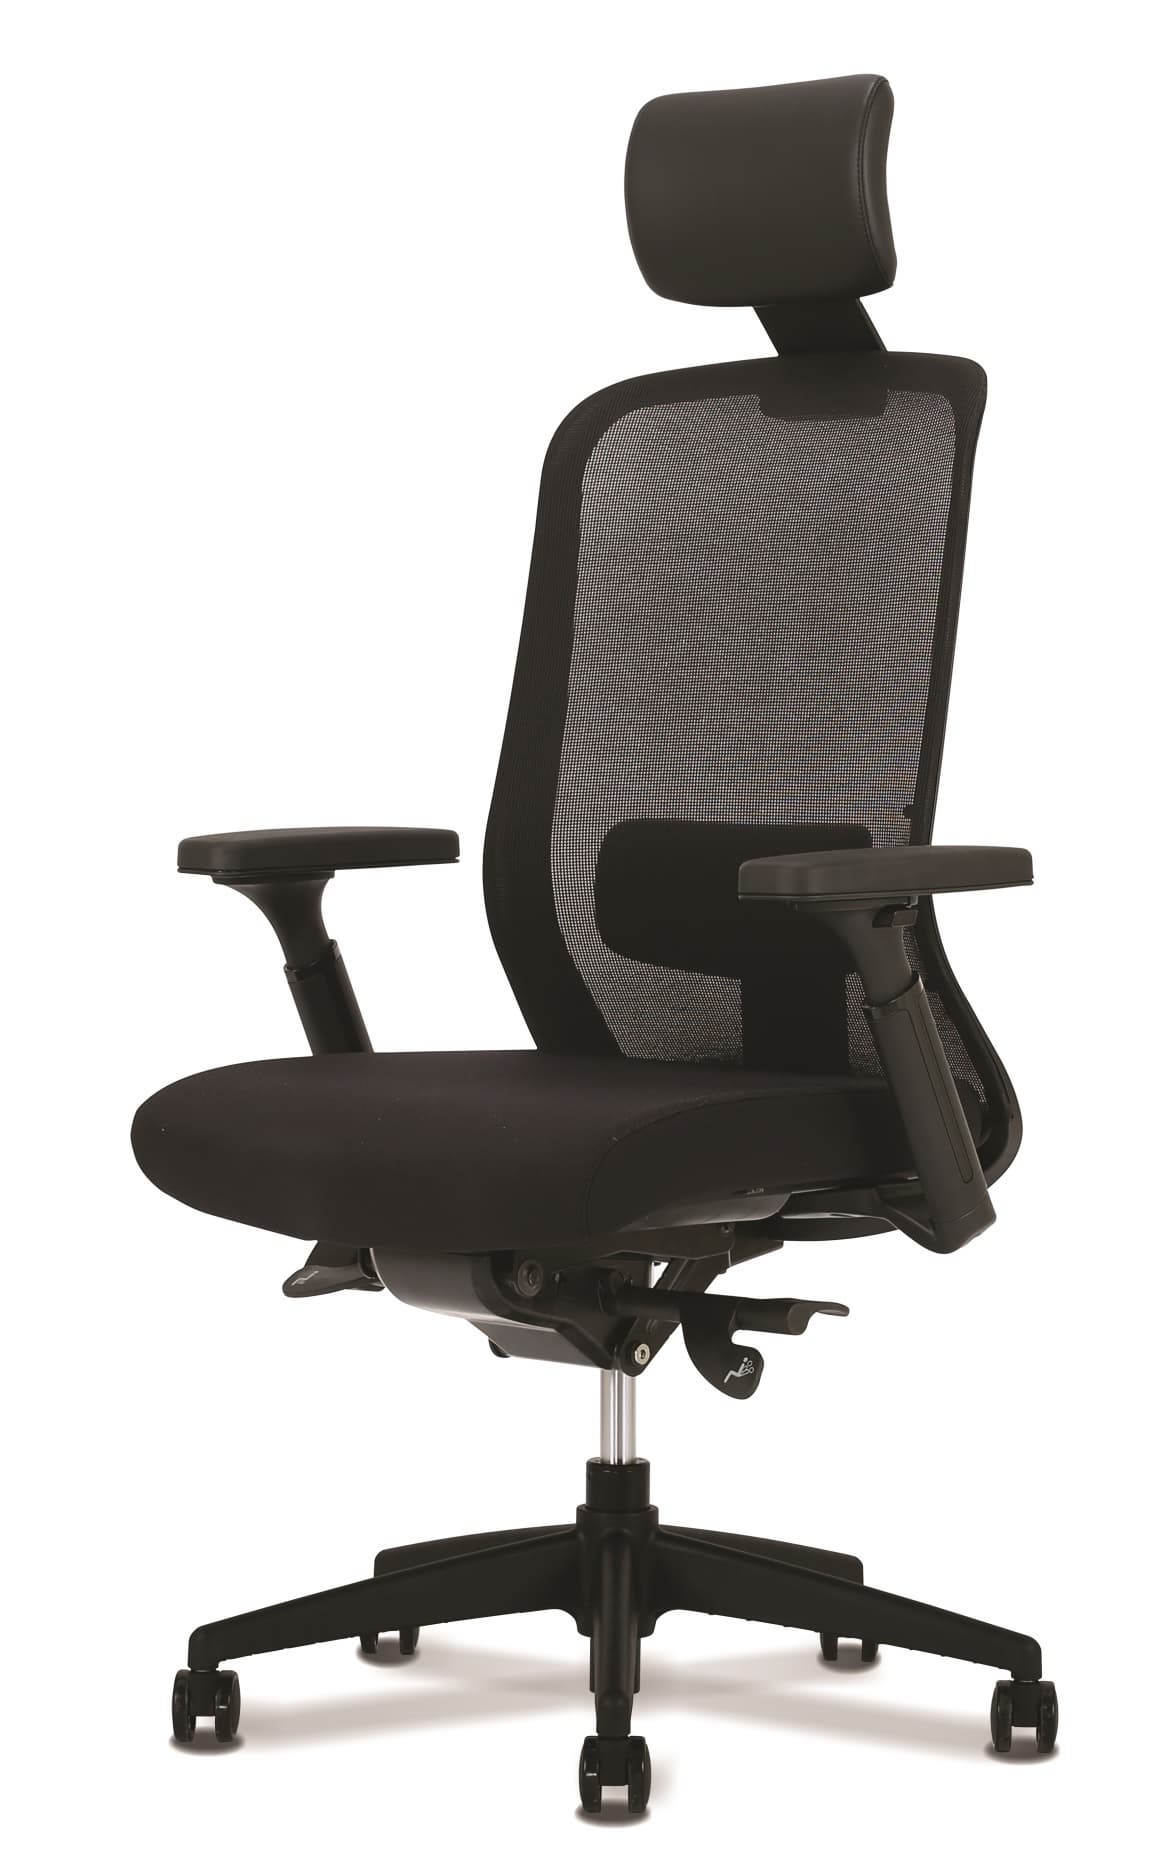 Office Chair made by Korean company